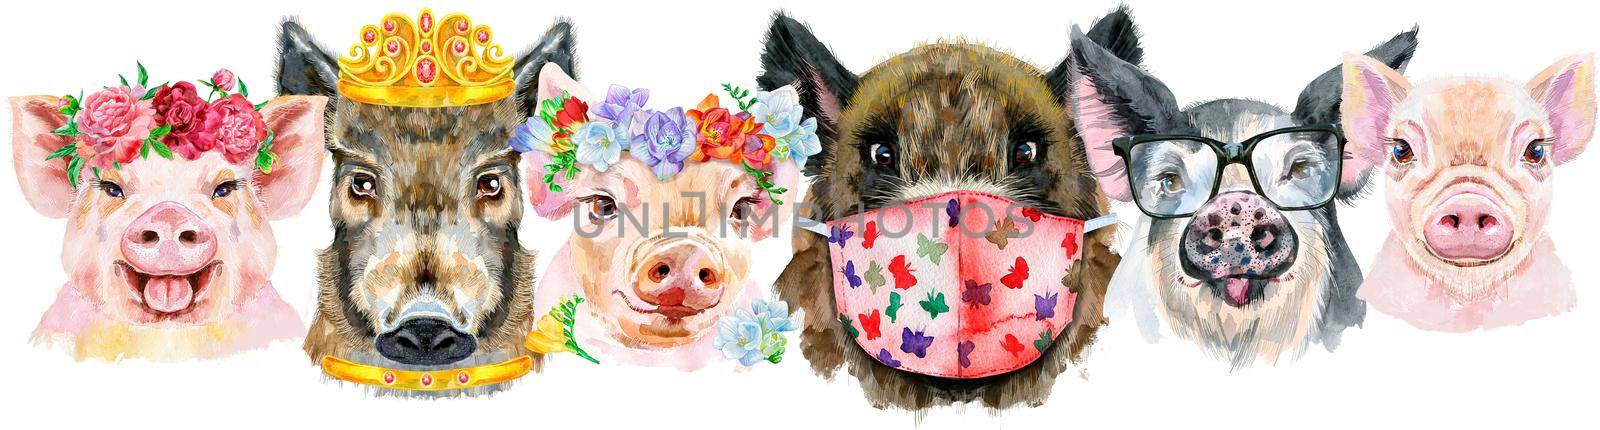 Cute border from watercolor portraits of pigs. Watercolor illustration of pigs in wreath of peonies, glasses, medical mask and golden crown